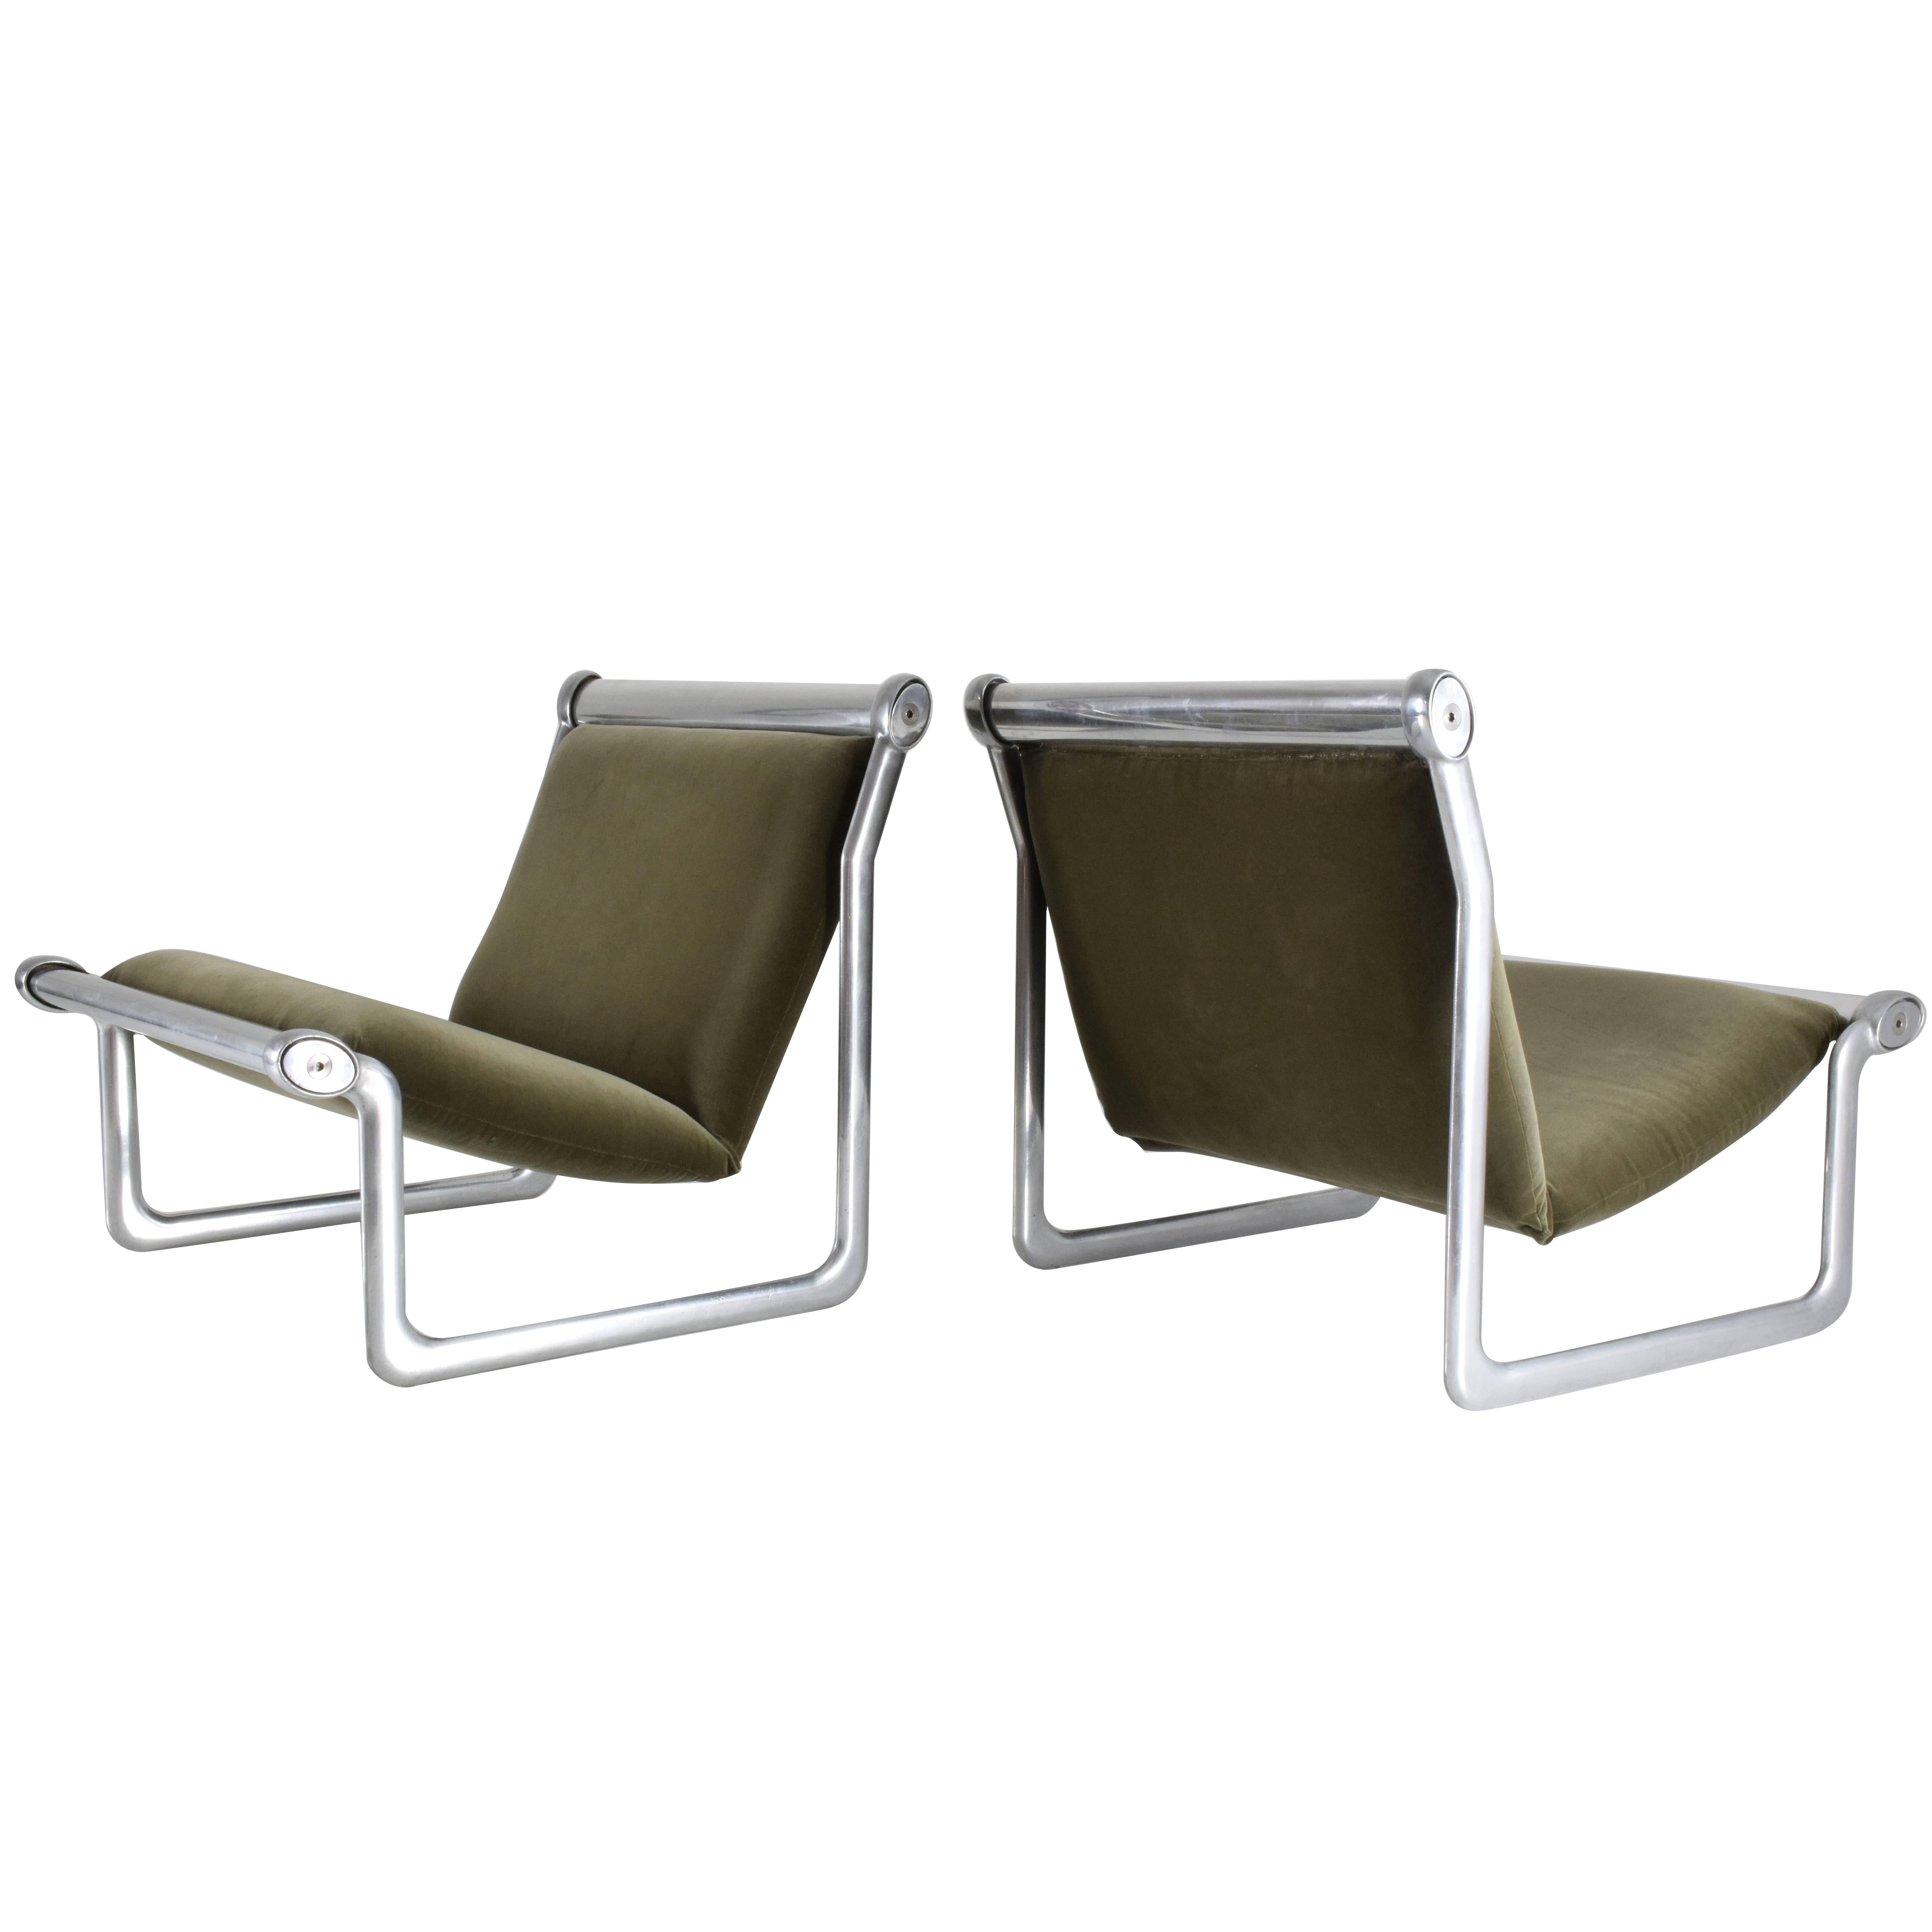 Pair of Vintage  Lounge Chairs by Hannah Morrison for Knoll, 1970's